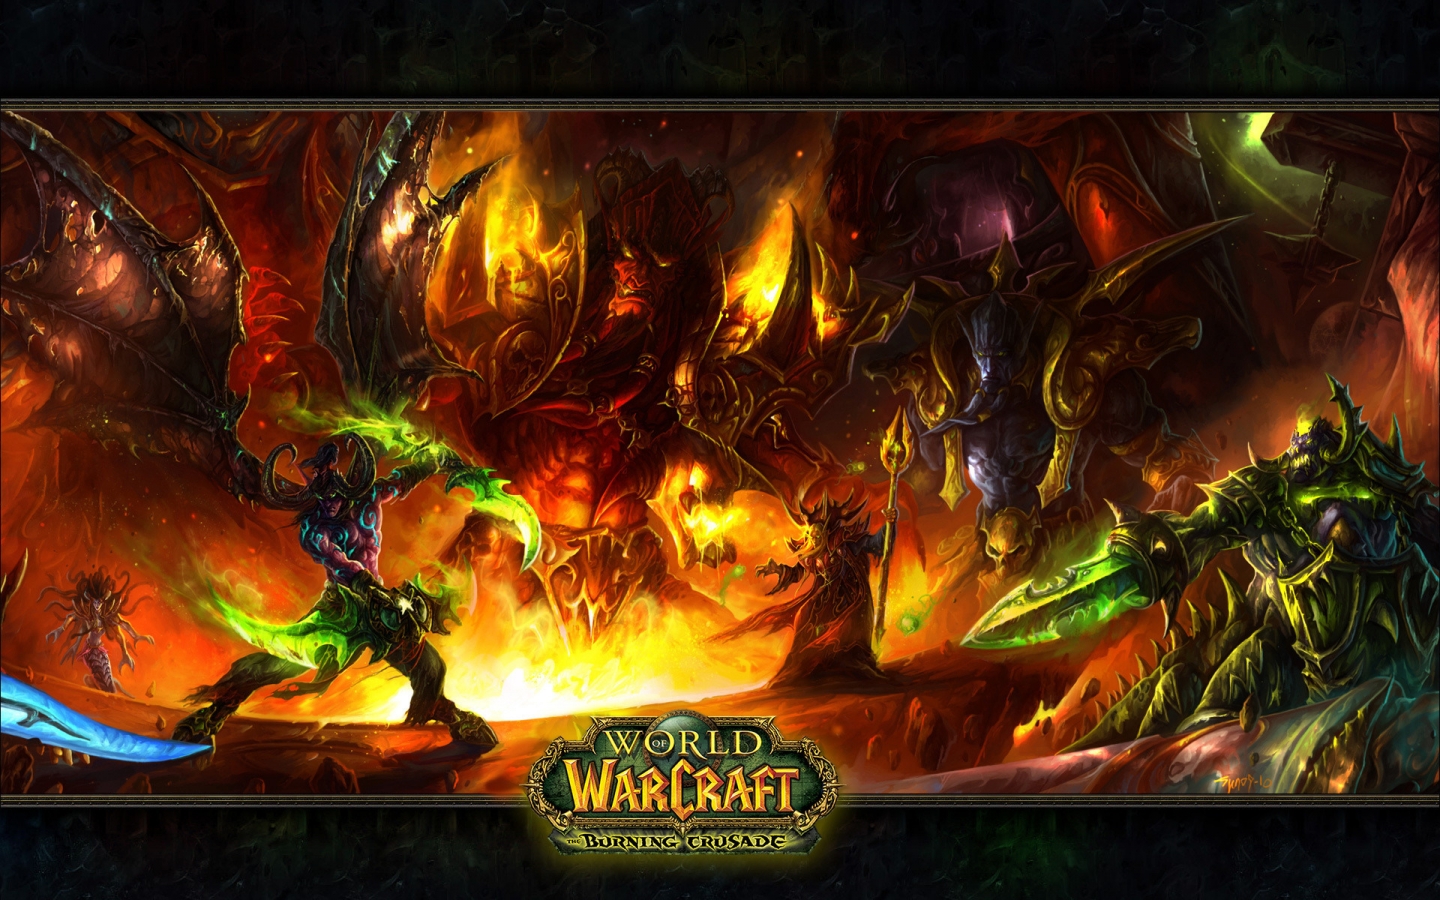 World of Warcraft Burning Crusade for 1440 x 900 widescreen resolution